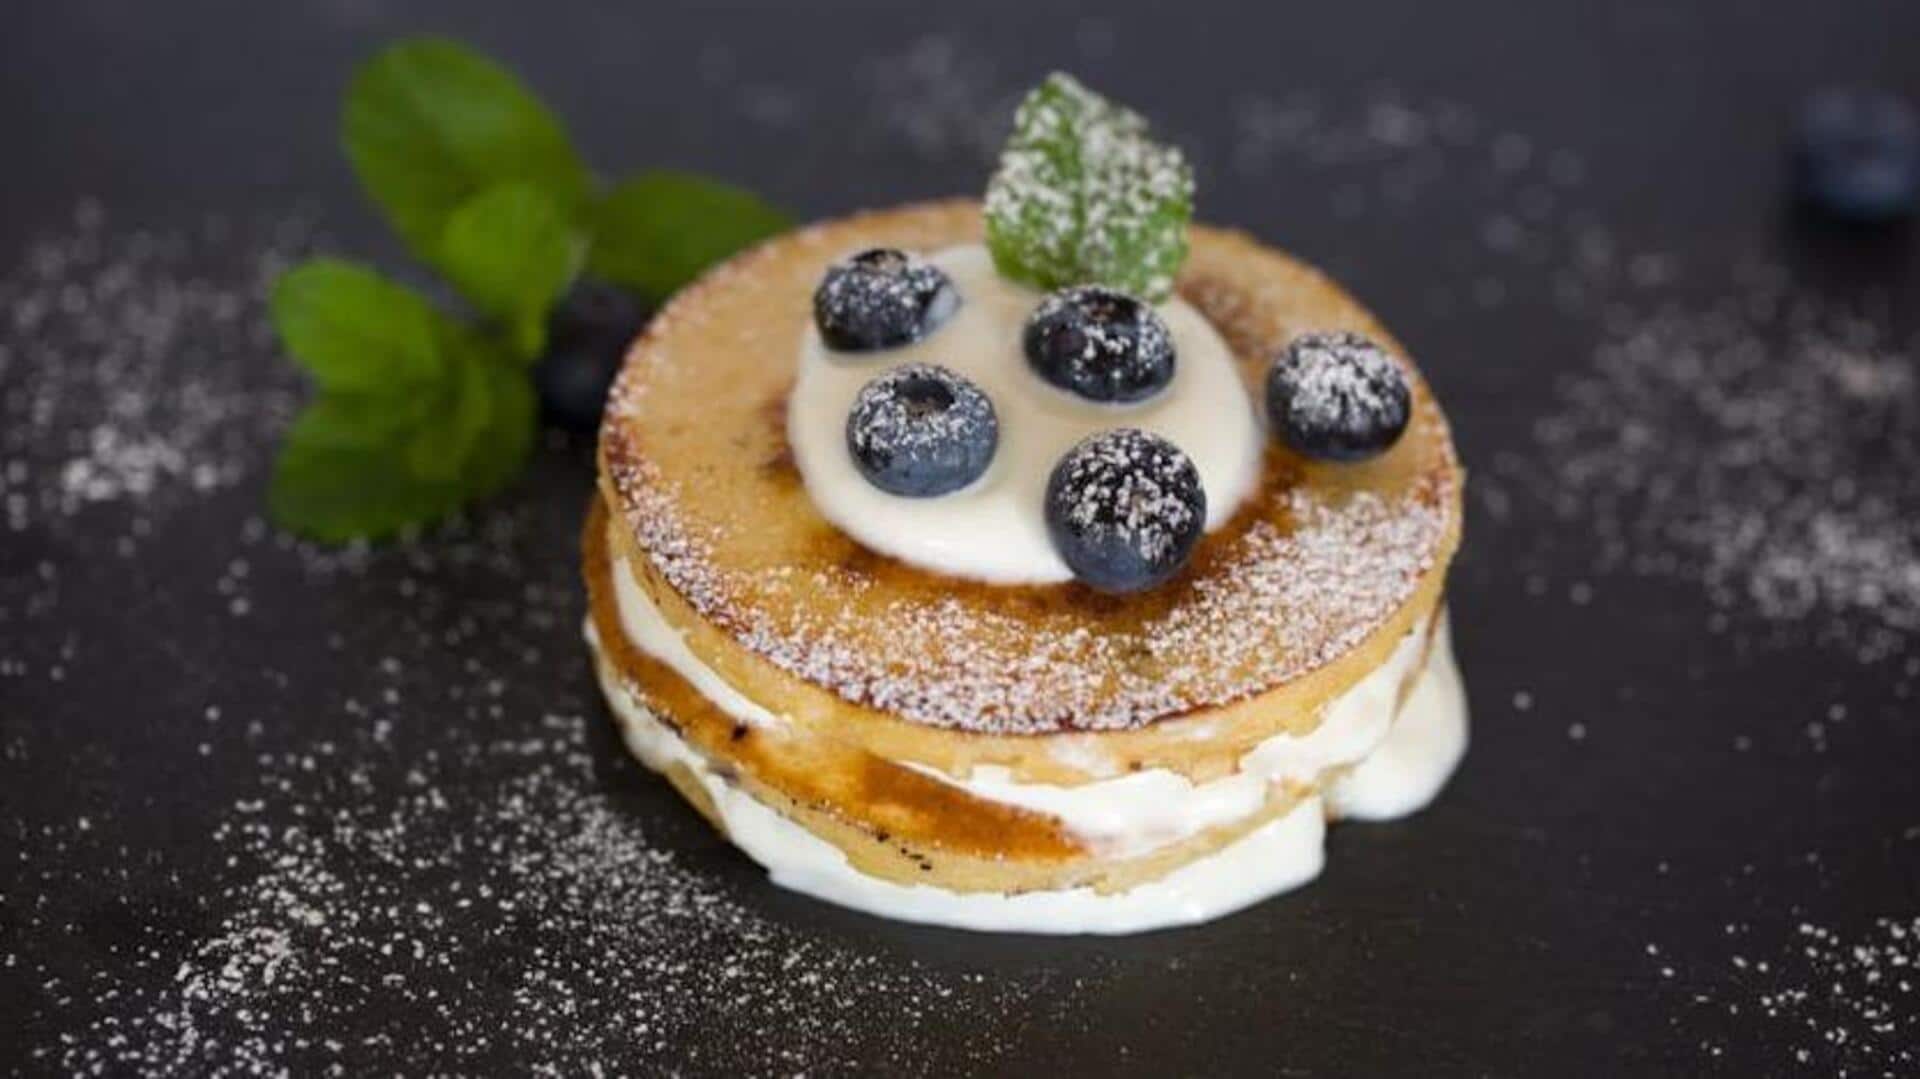 Tuck into these flaxseed-infused vegan pancakes